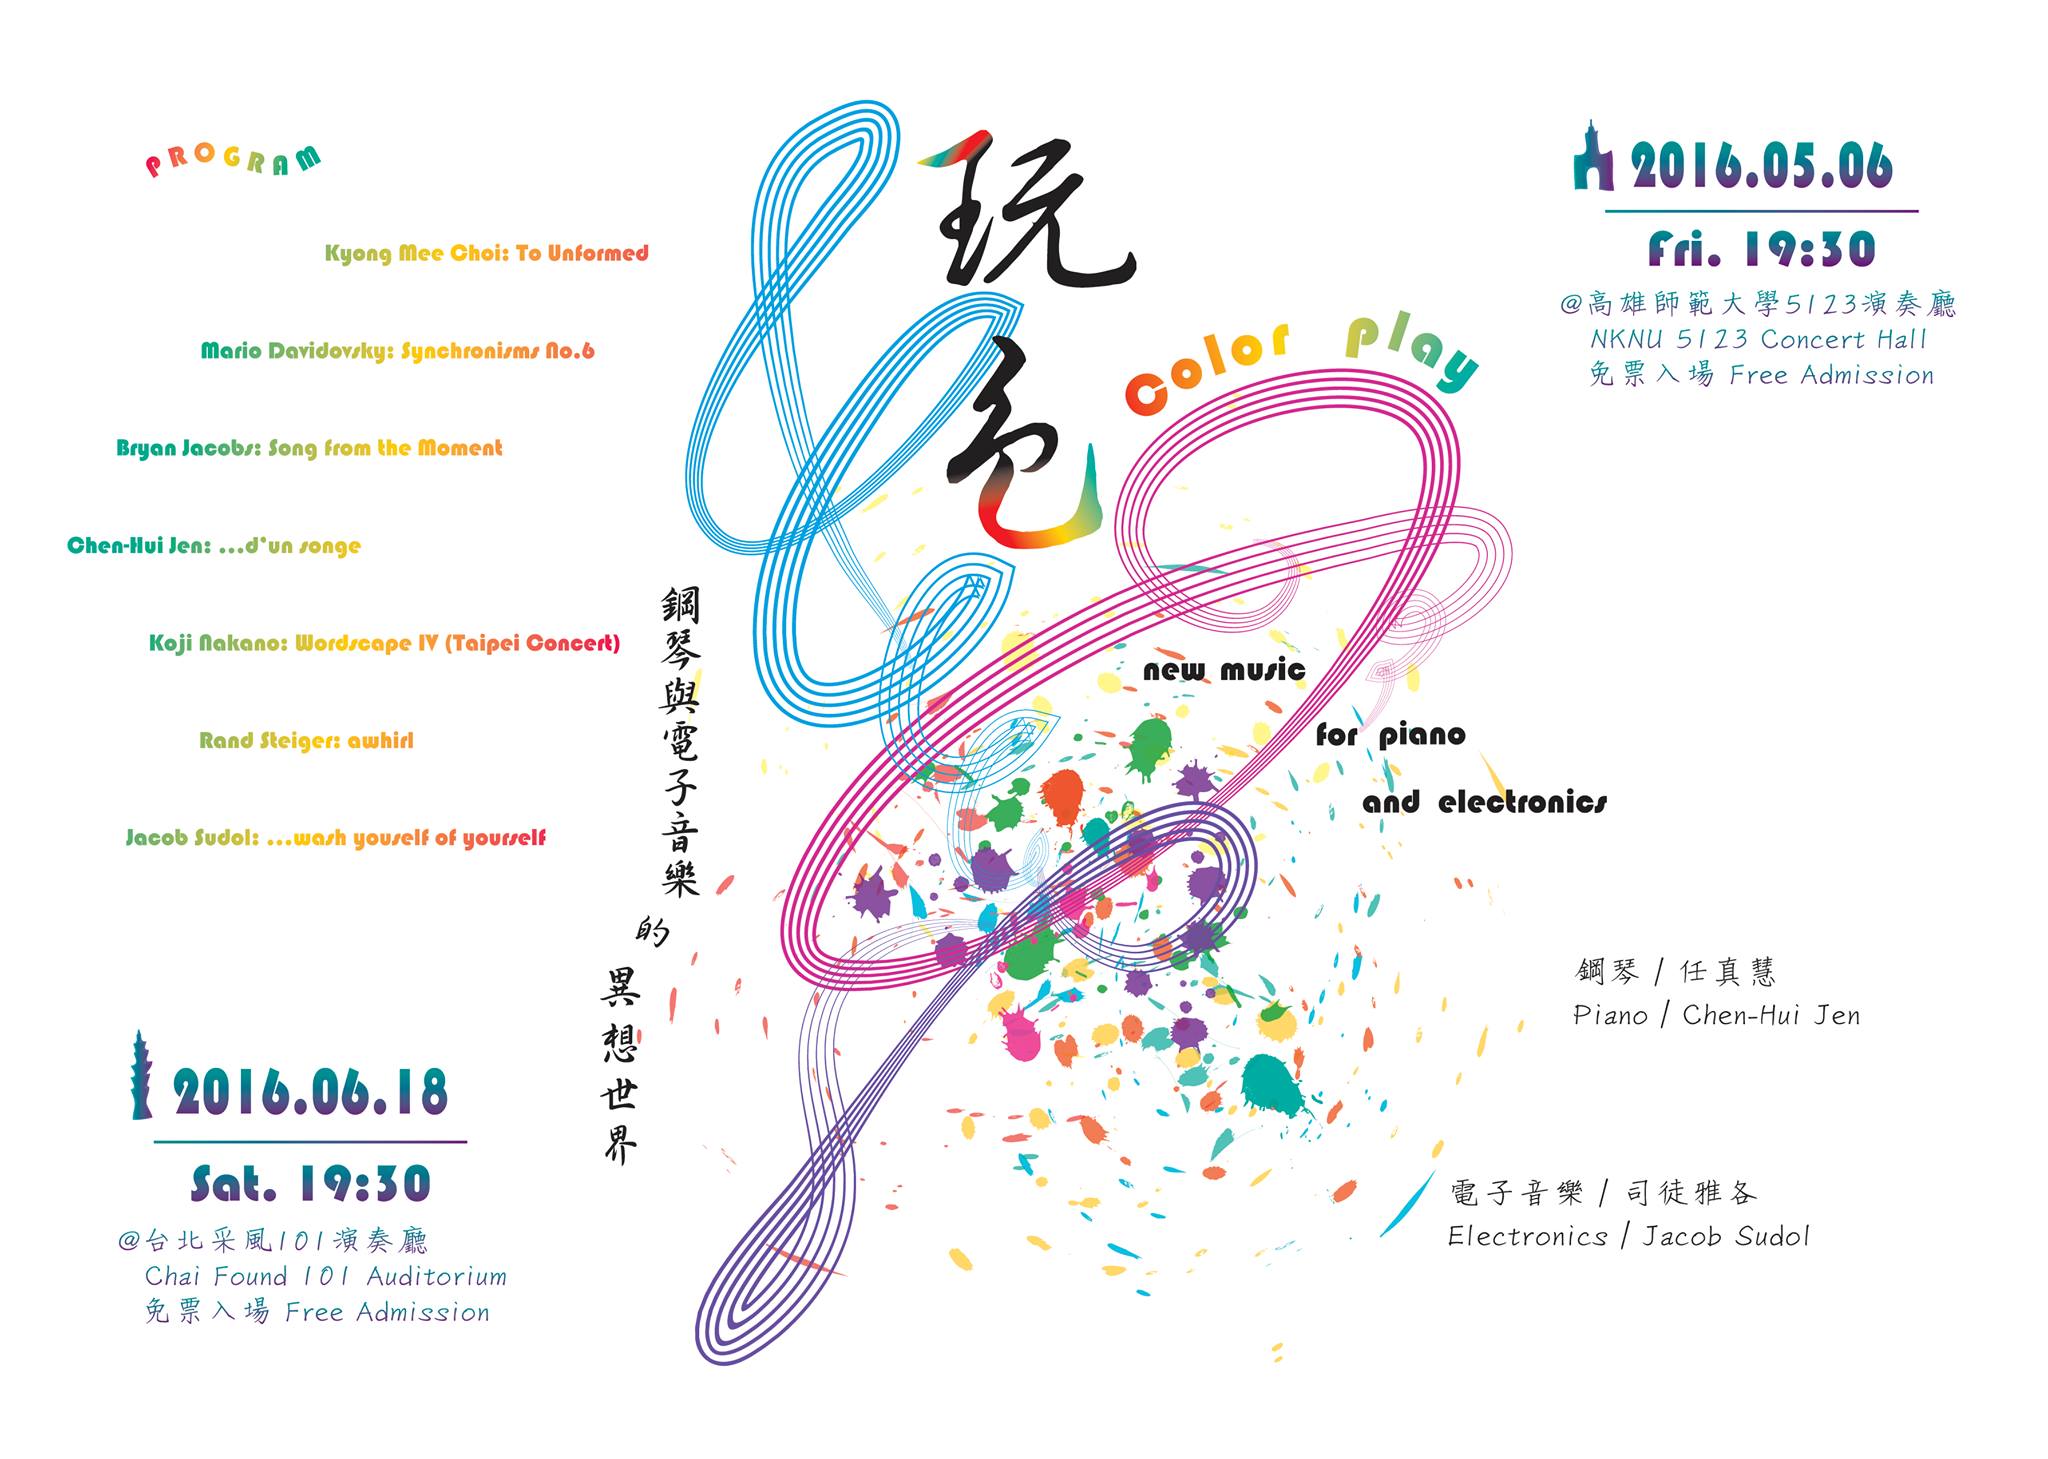 The flyer for a series of concerts in Taiwan called “Color Play” which contains graphic elecments based on Chinese calligraphy.